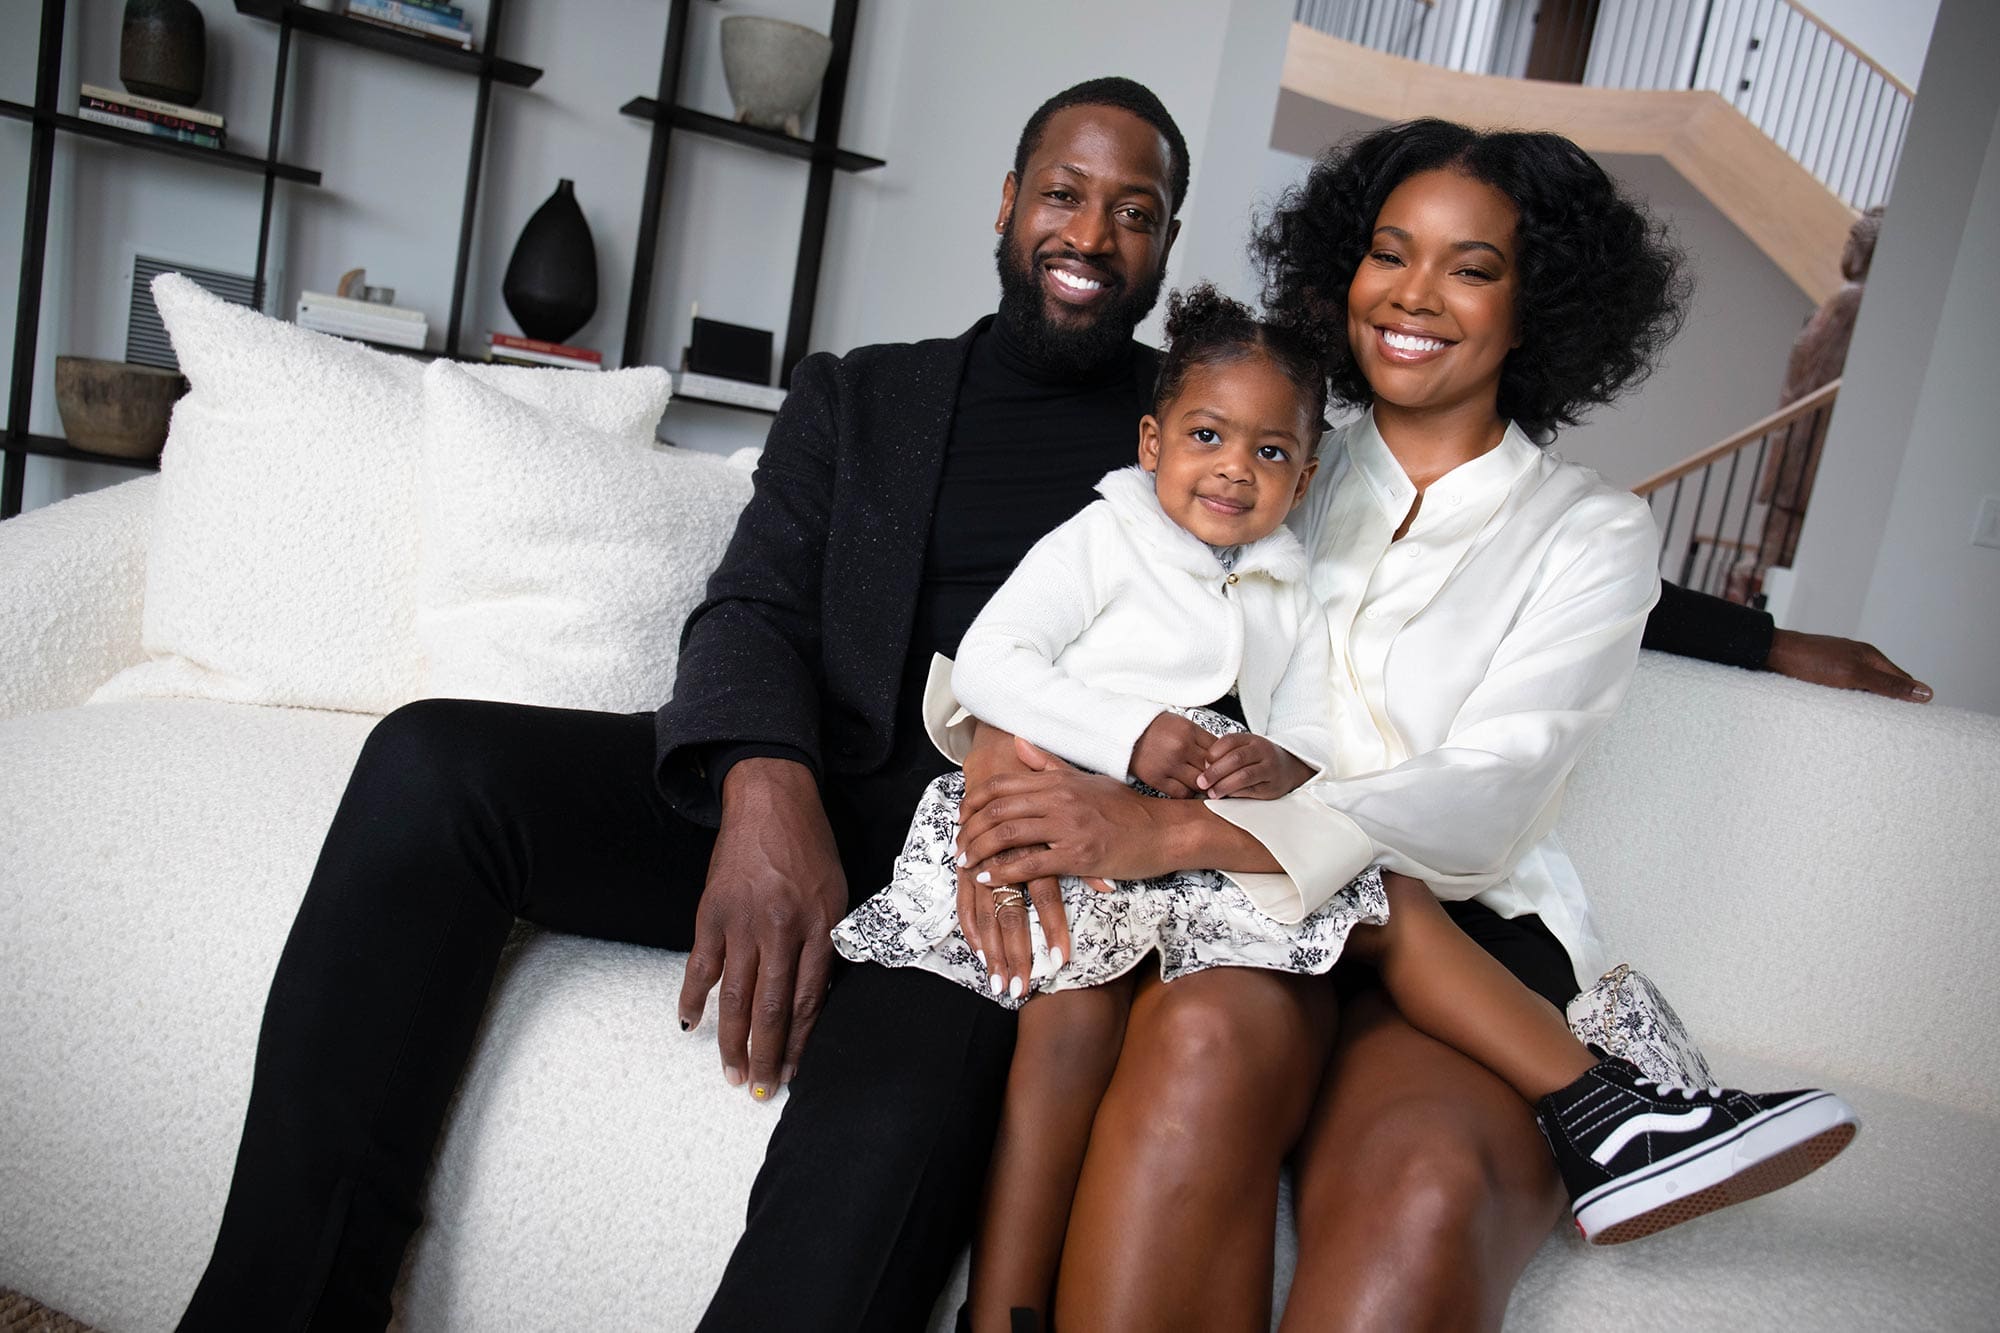 ”gabrielle-union-celebrates-fathers-day-with-this-impressive-video”